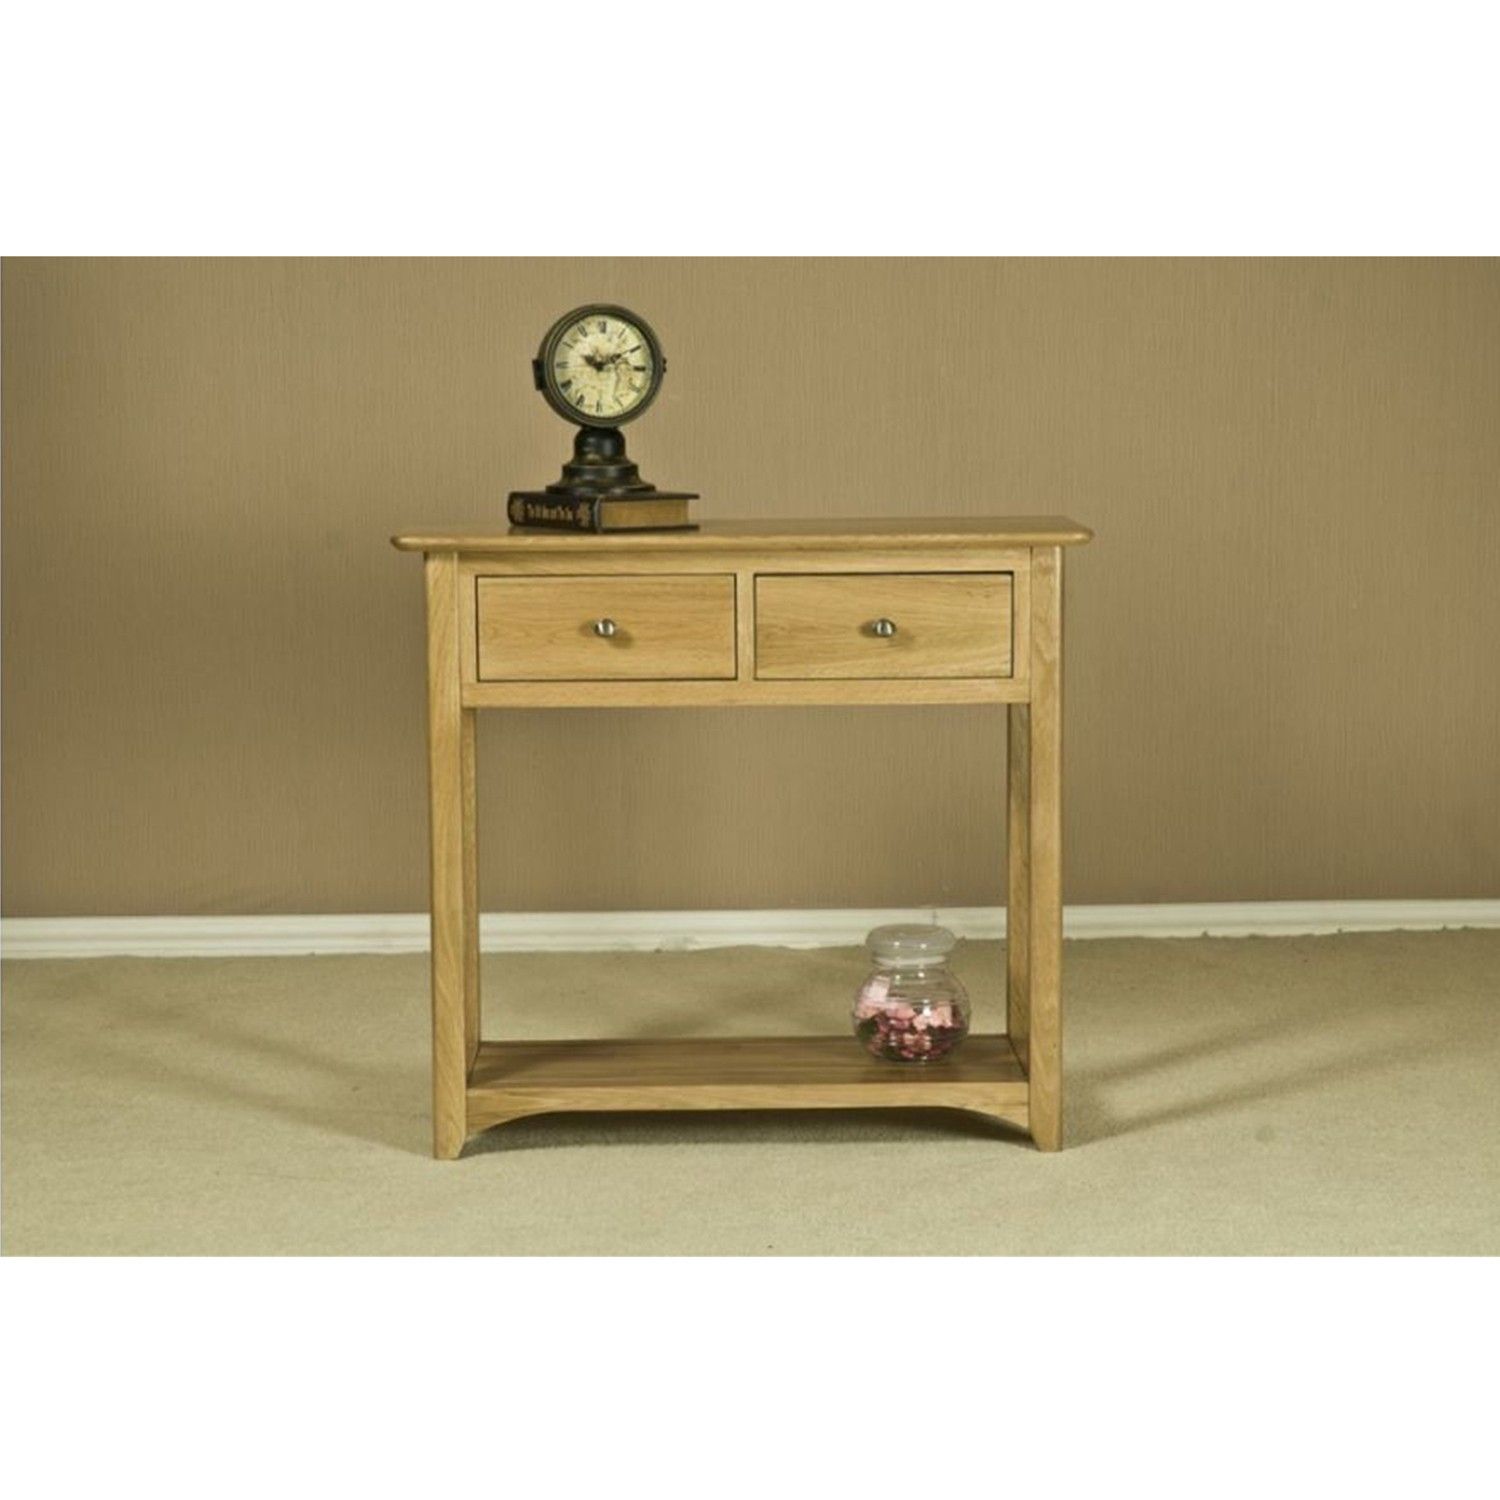 Casa Toulouse 2 Drawer Console Table | Leekes Regarding 2 Drawer Console Tables (View 15 of 20)